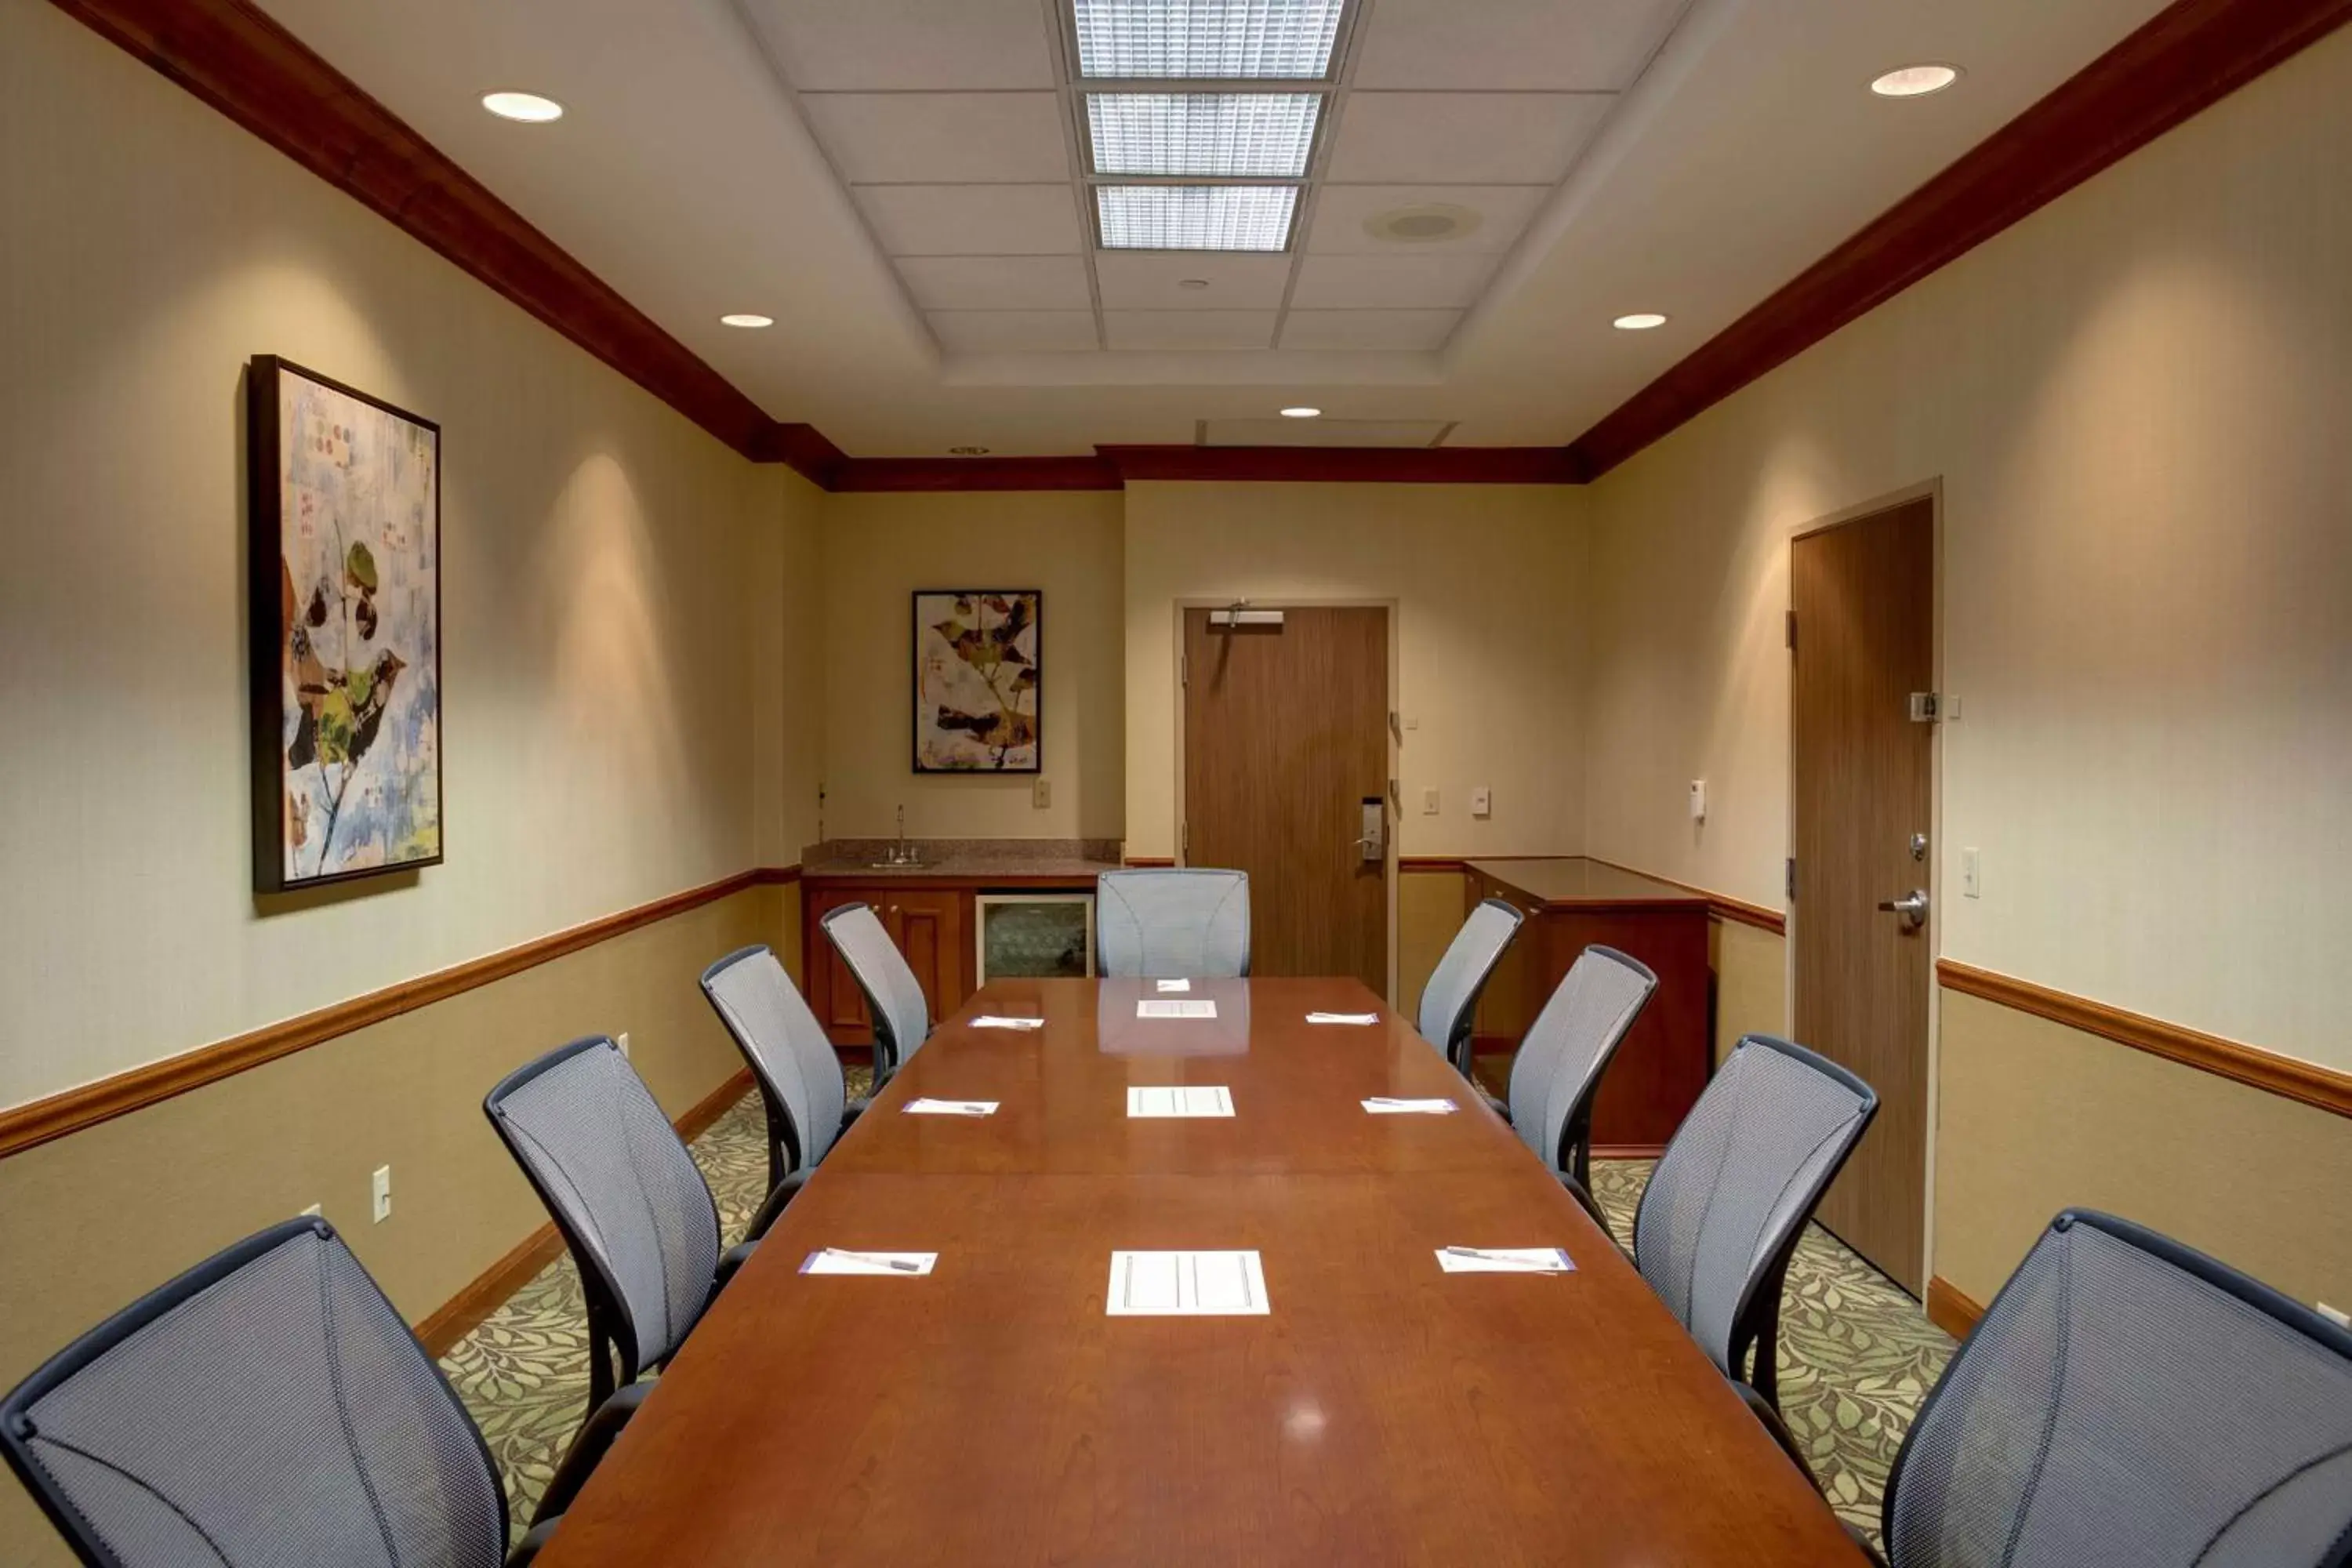 Meeting/conference room in Hilton Garden Inn Oklahoma City Airport